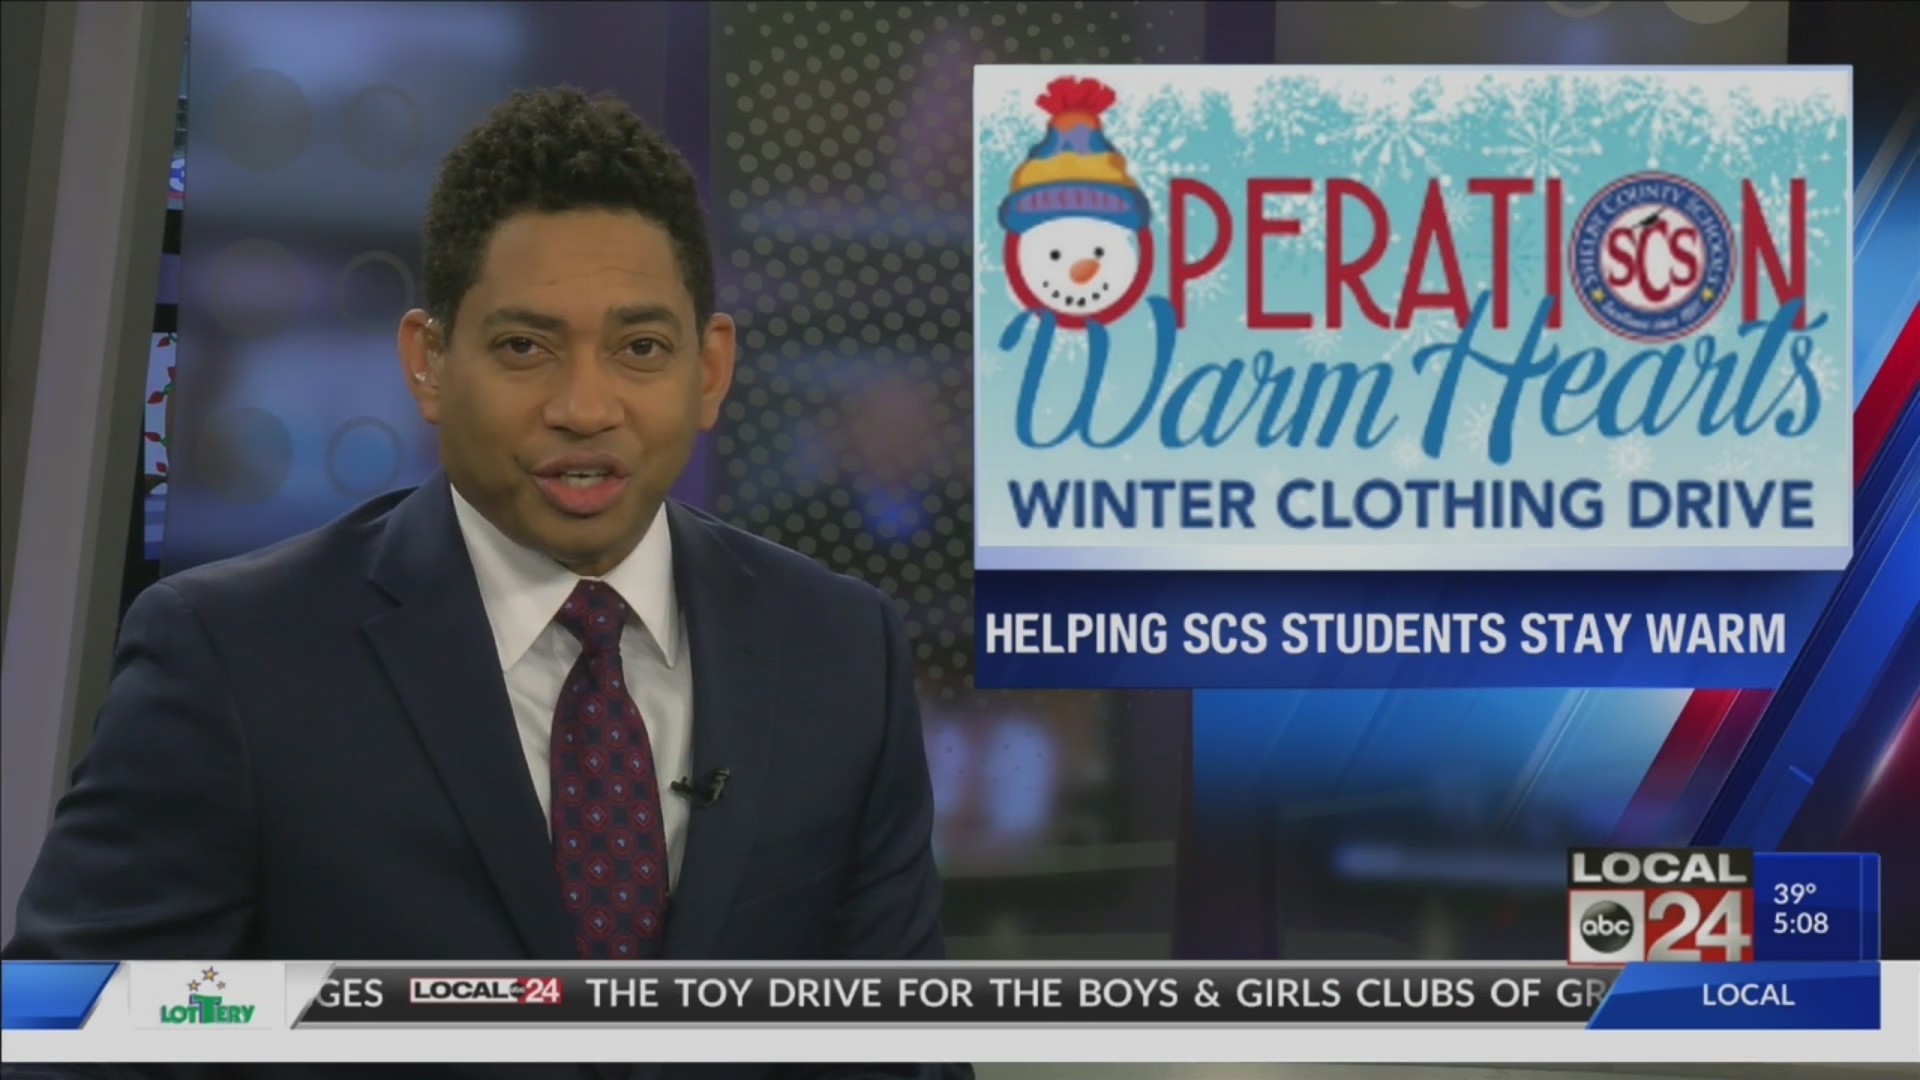 Shelby County Schools holds Operation Warm Hearts to help students stay warm this winter